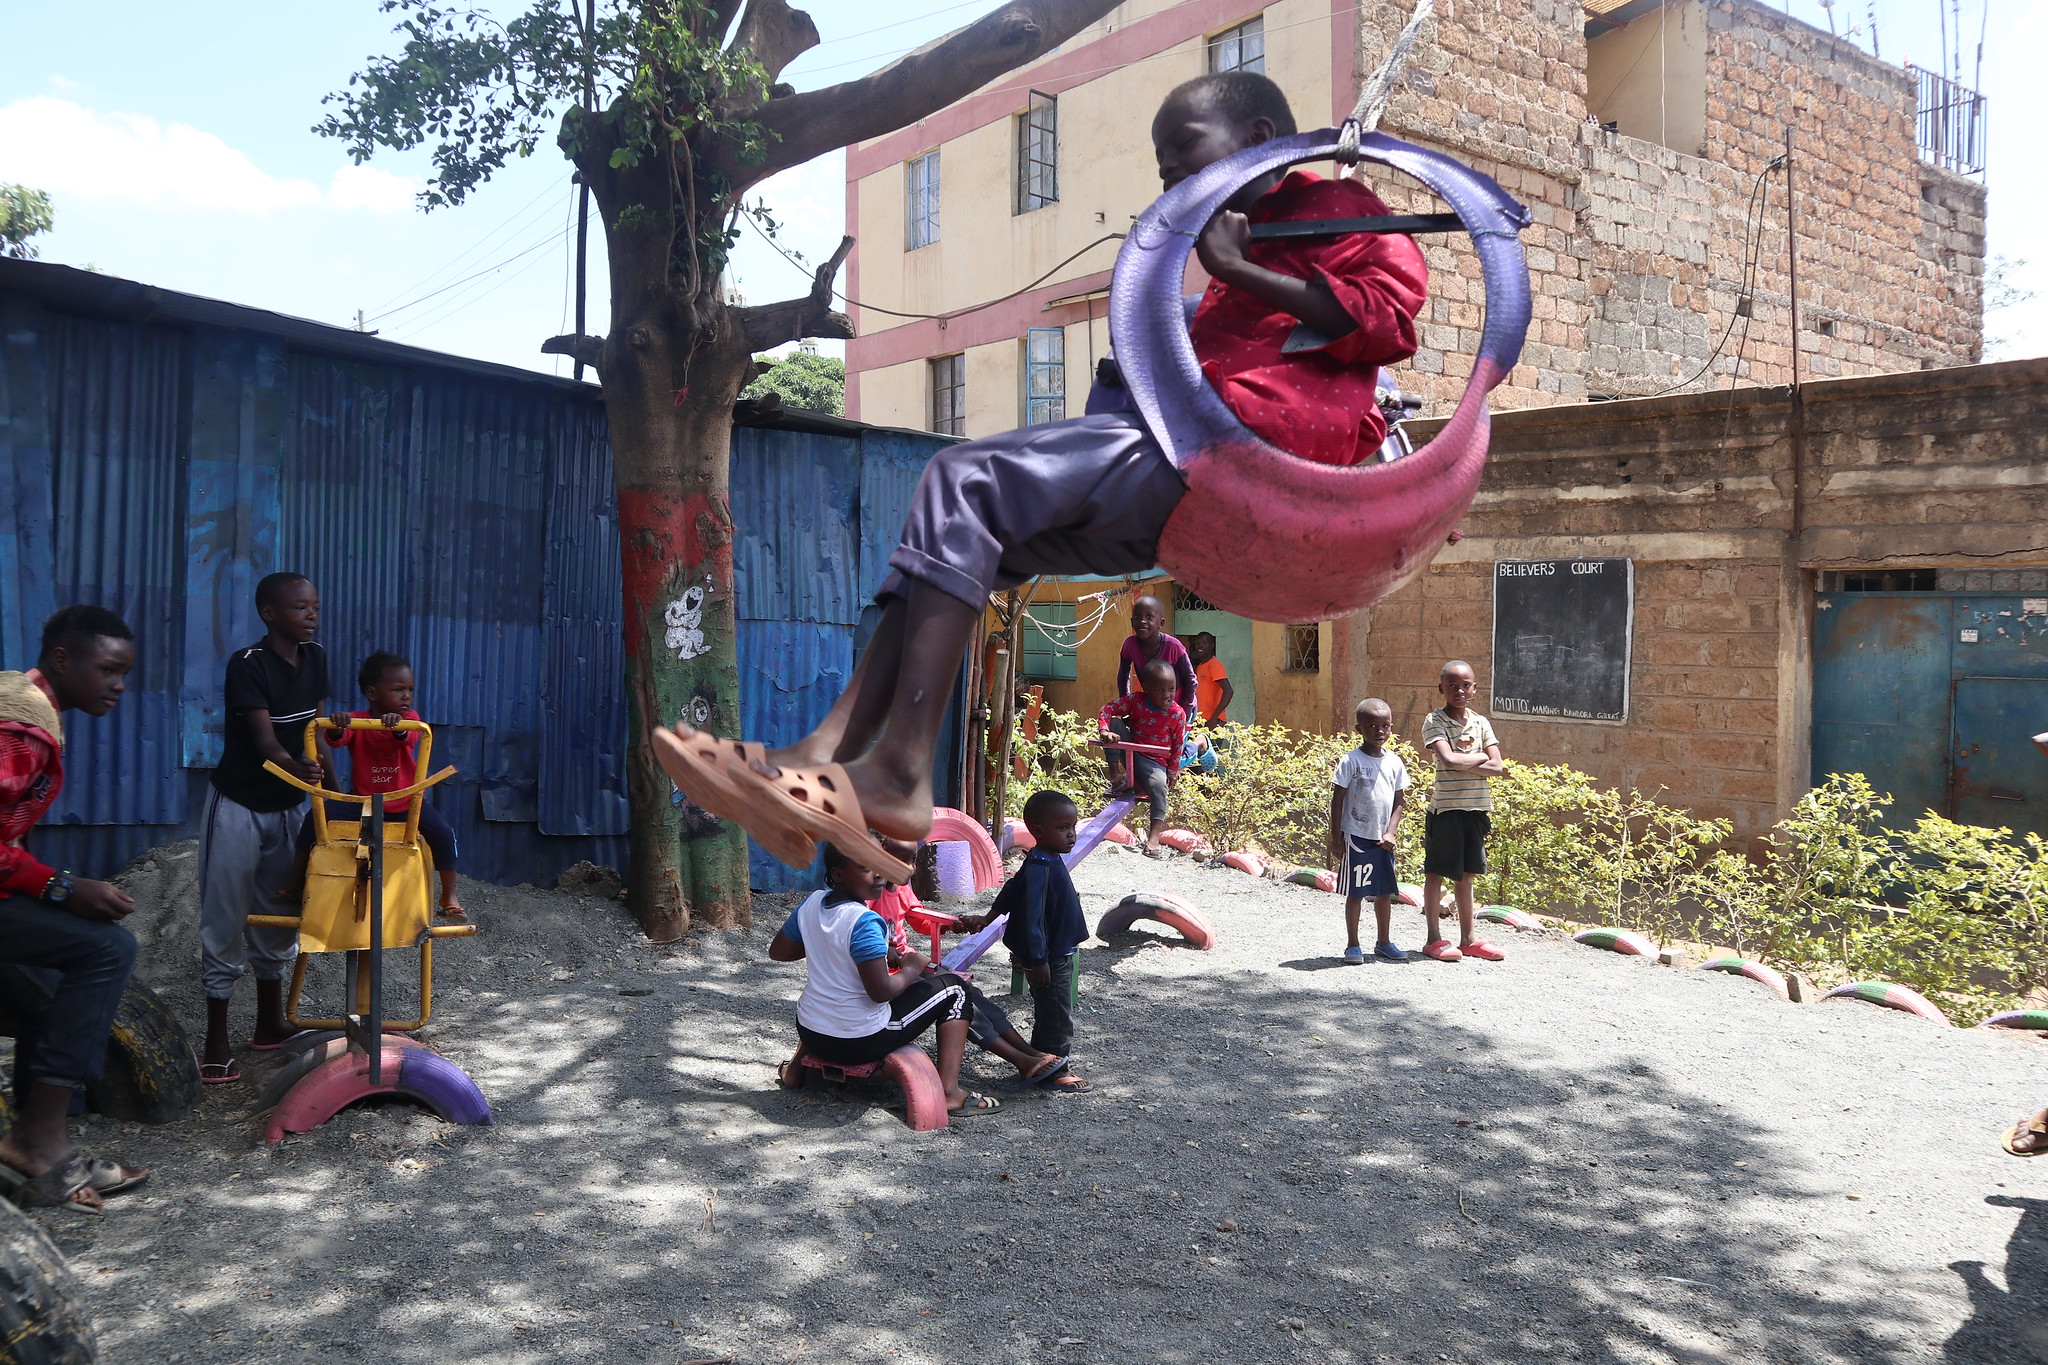 A boy plays on a swing in a children’s playground created by local youth in a former crime ridden area on the outskirts of the Kenyan capital Nairobi UN-Habitat2019Susannah Price